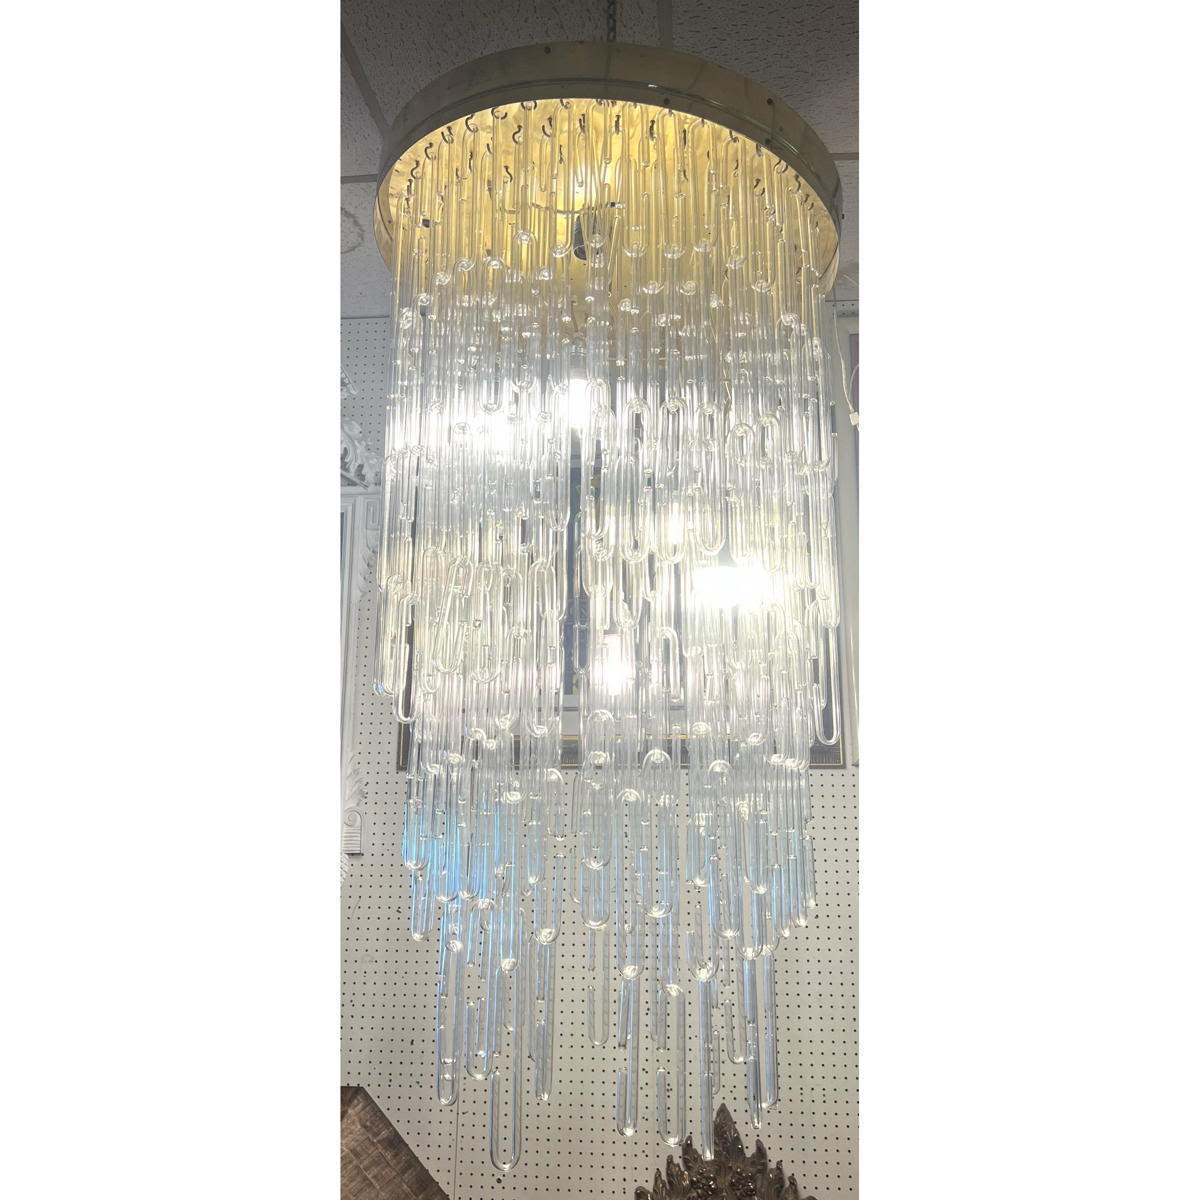 Large Camer style Glass Tube Chandelier.